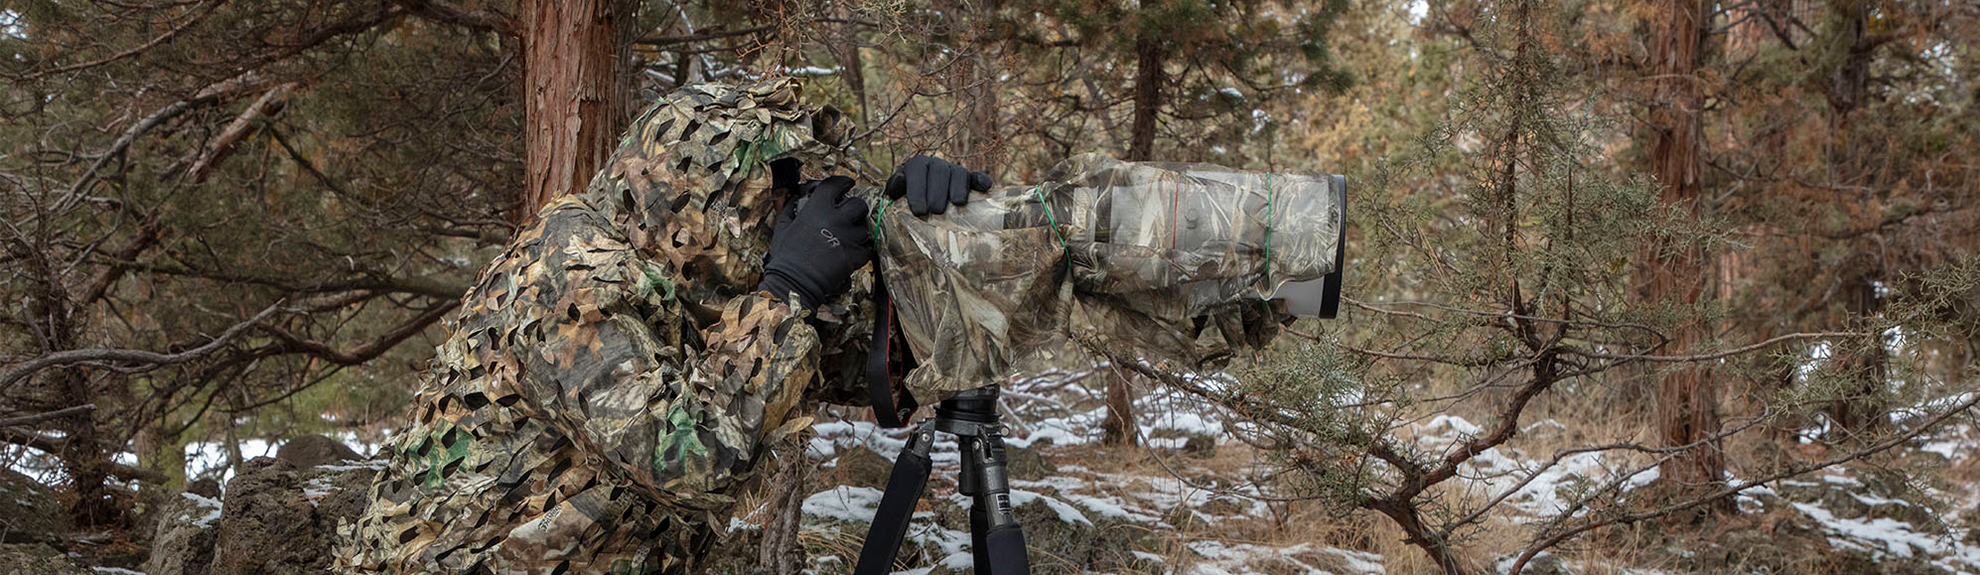 Image of photographer looking through camera that is perched on a tripod and completely covered in camoflauge